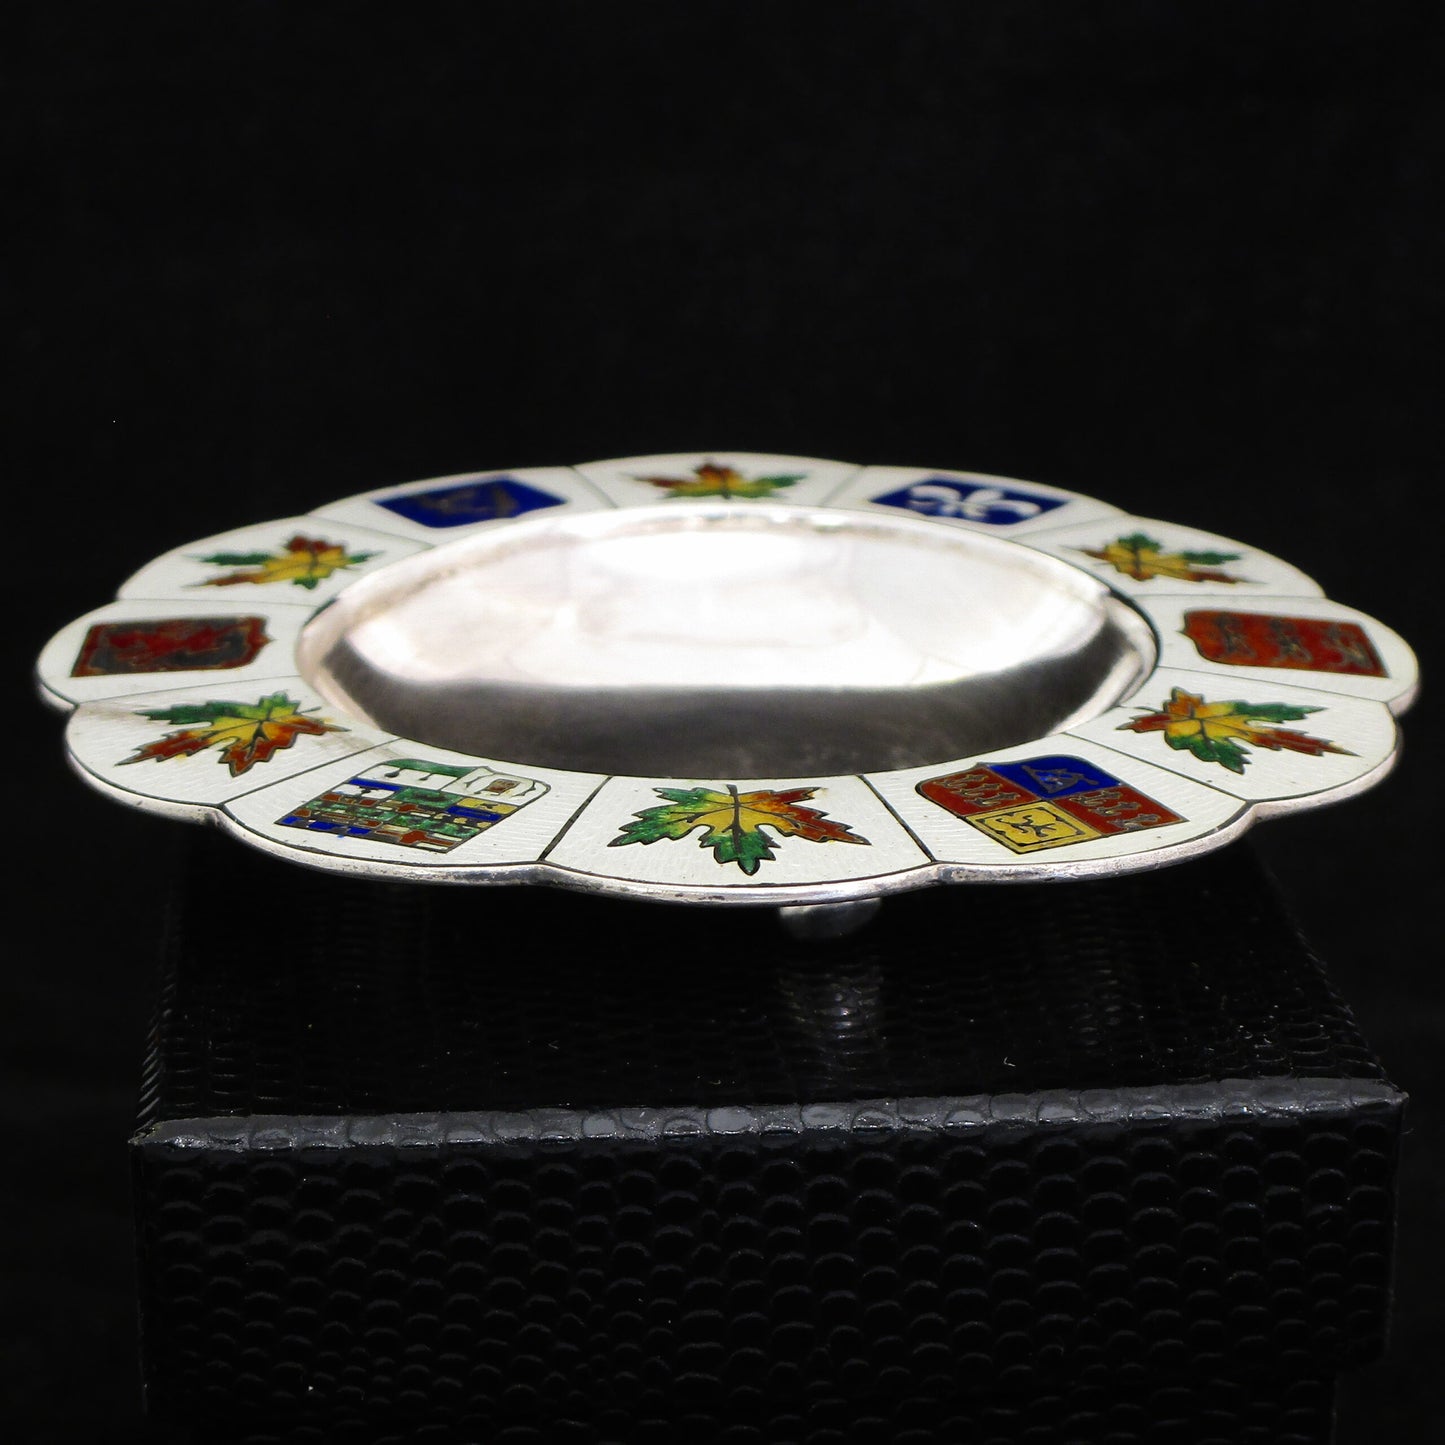 A silver and enamel ring tray.